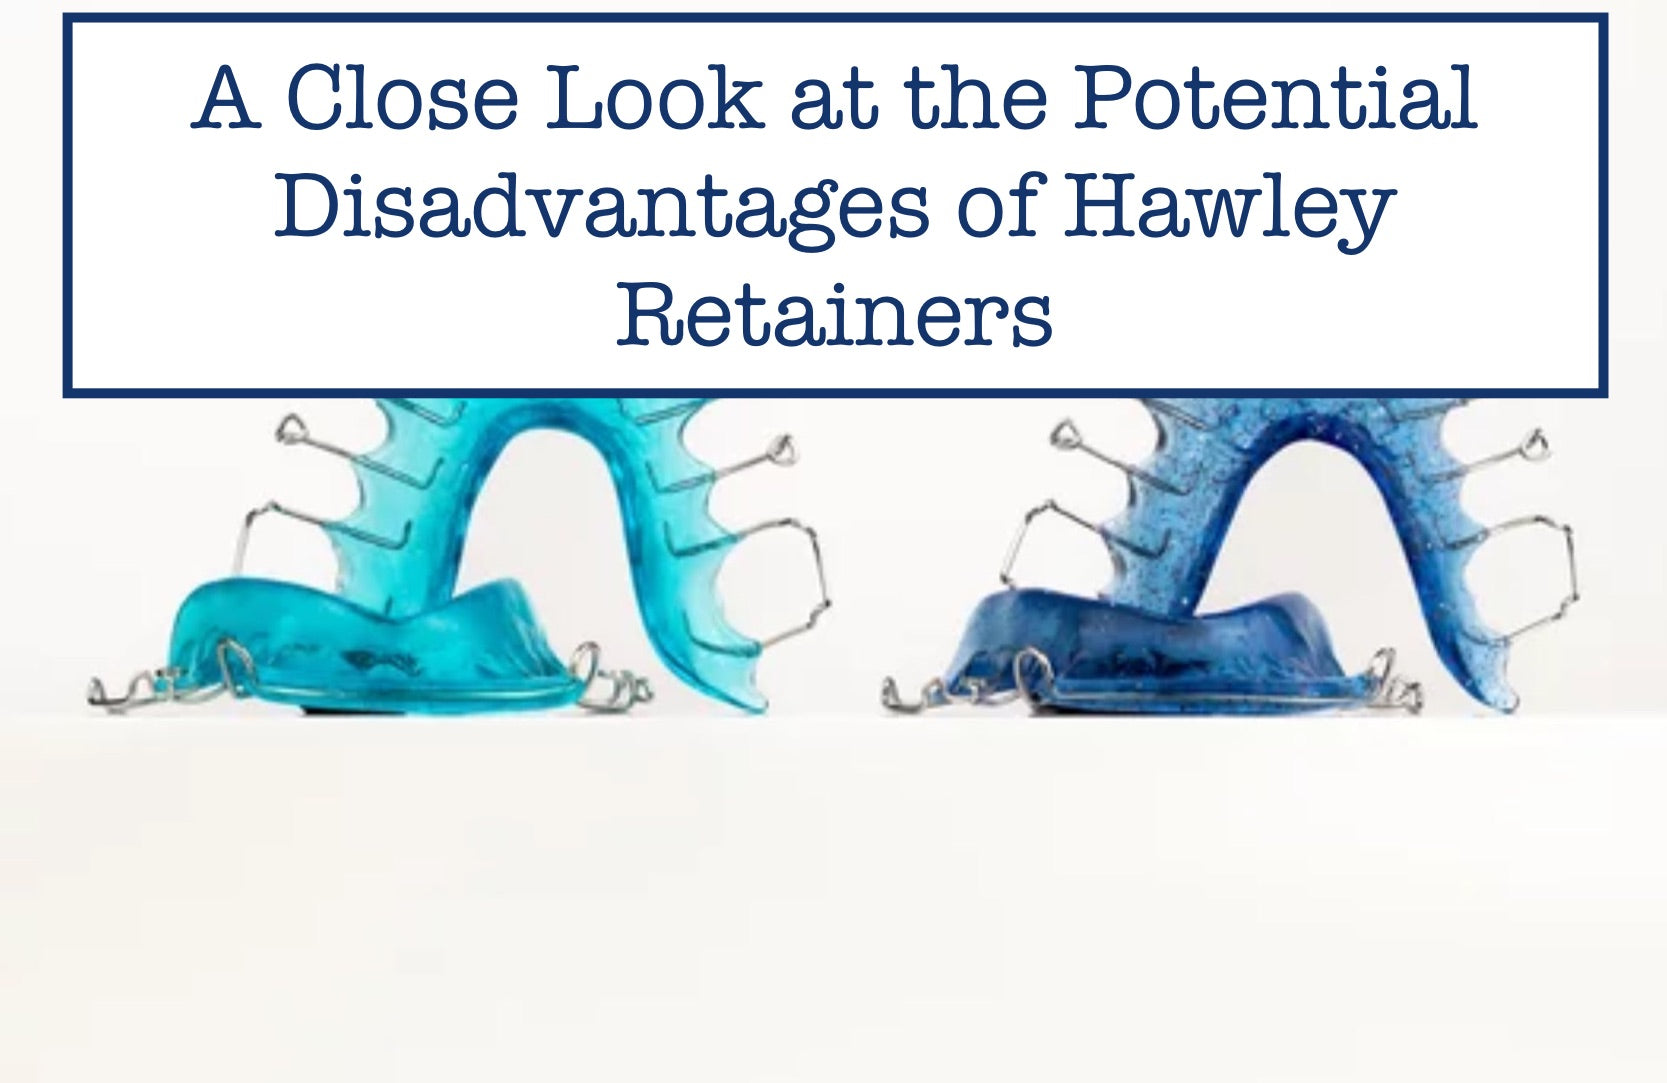 Hawley Retainers: Potential Drawbacks You Should Know